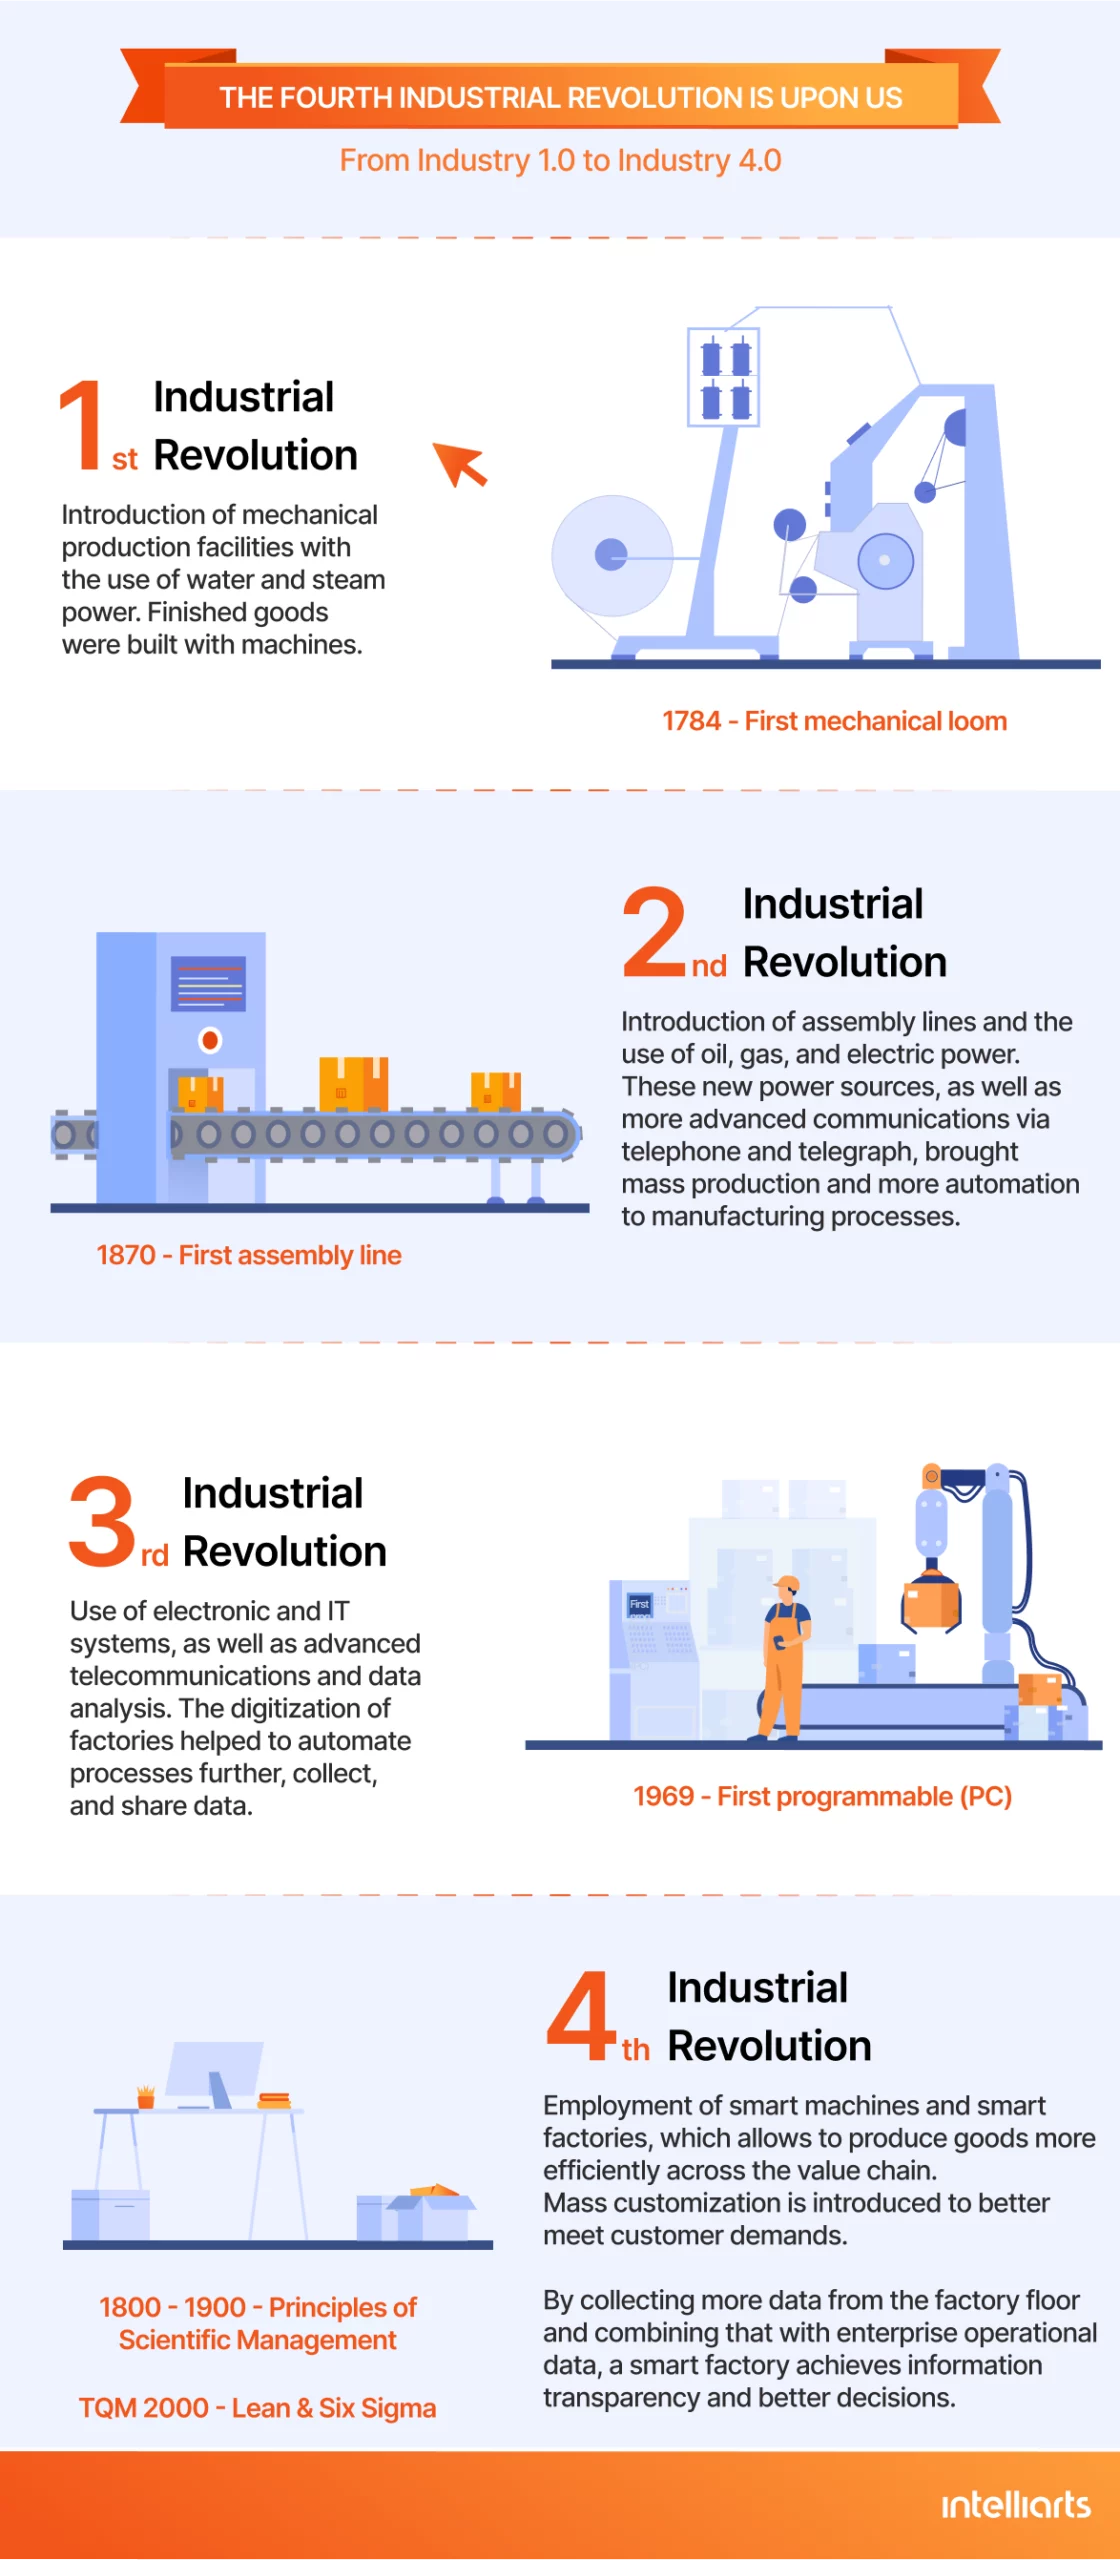 From industry 1.0 to industry 4.0